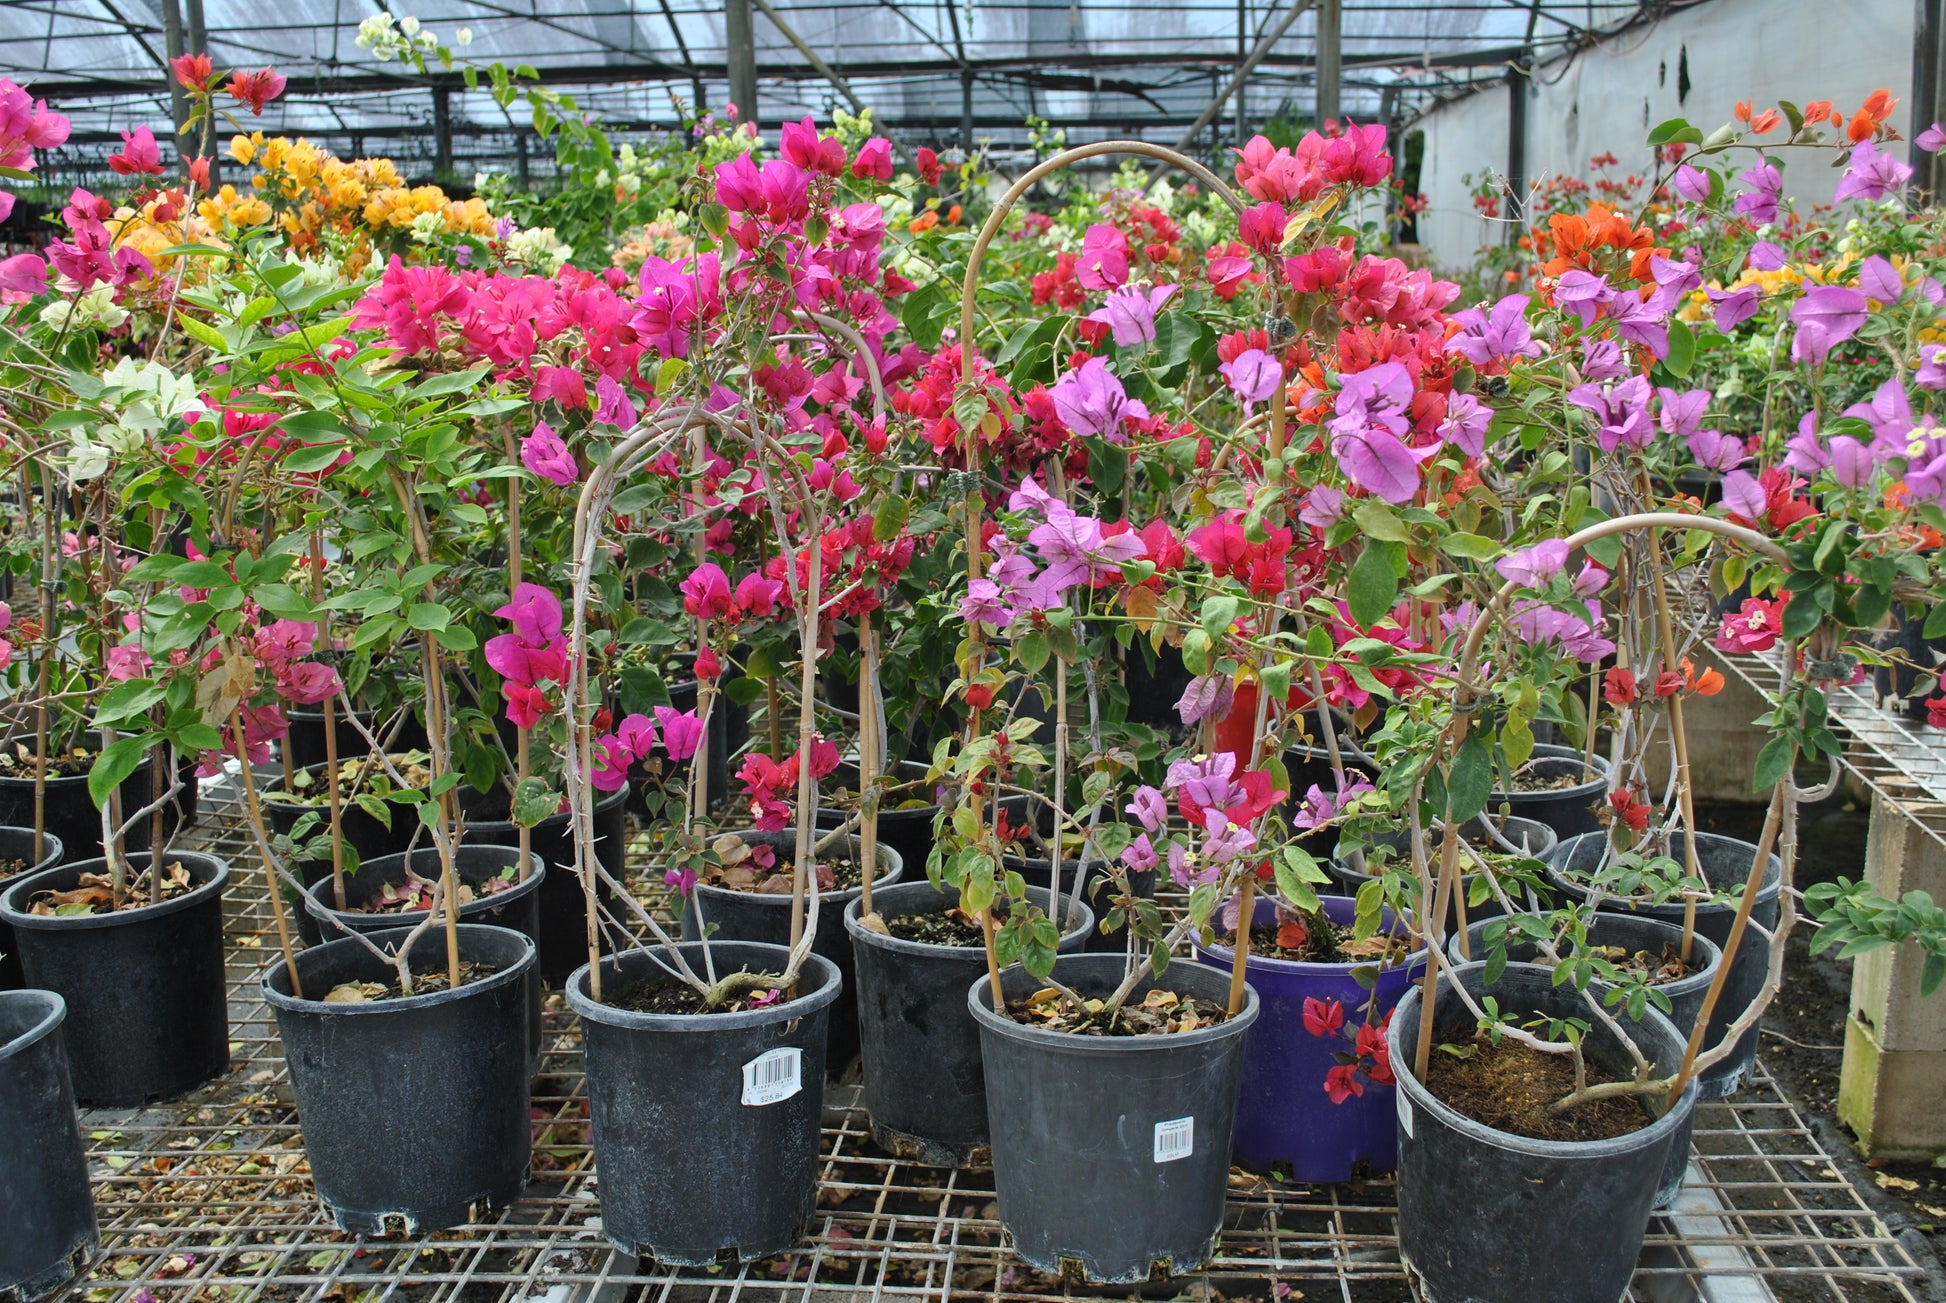 Pink, purple, yellow, white, orange flowers on the Bouganvillea plant. Vines have been trained